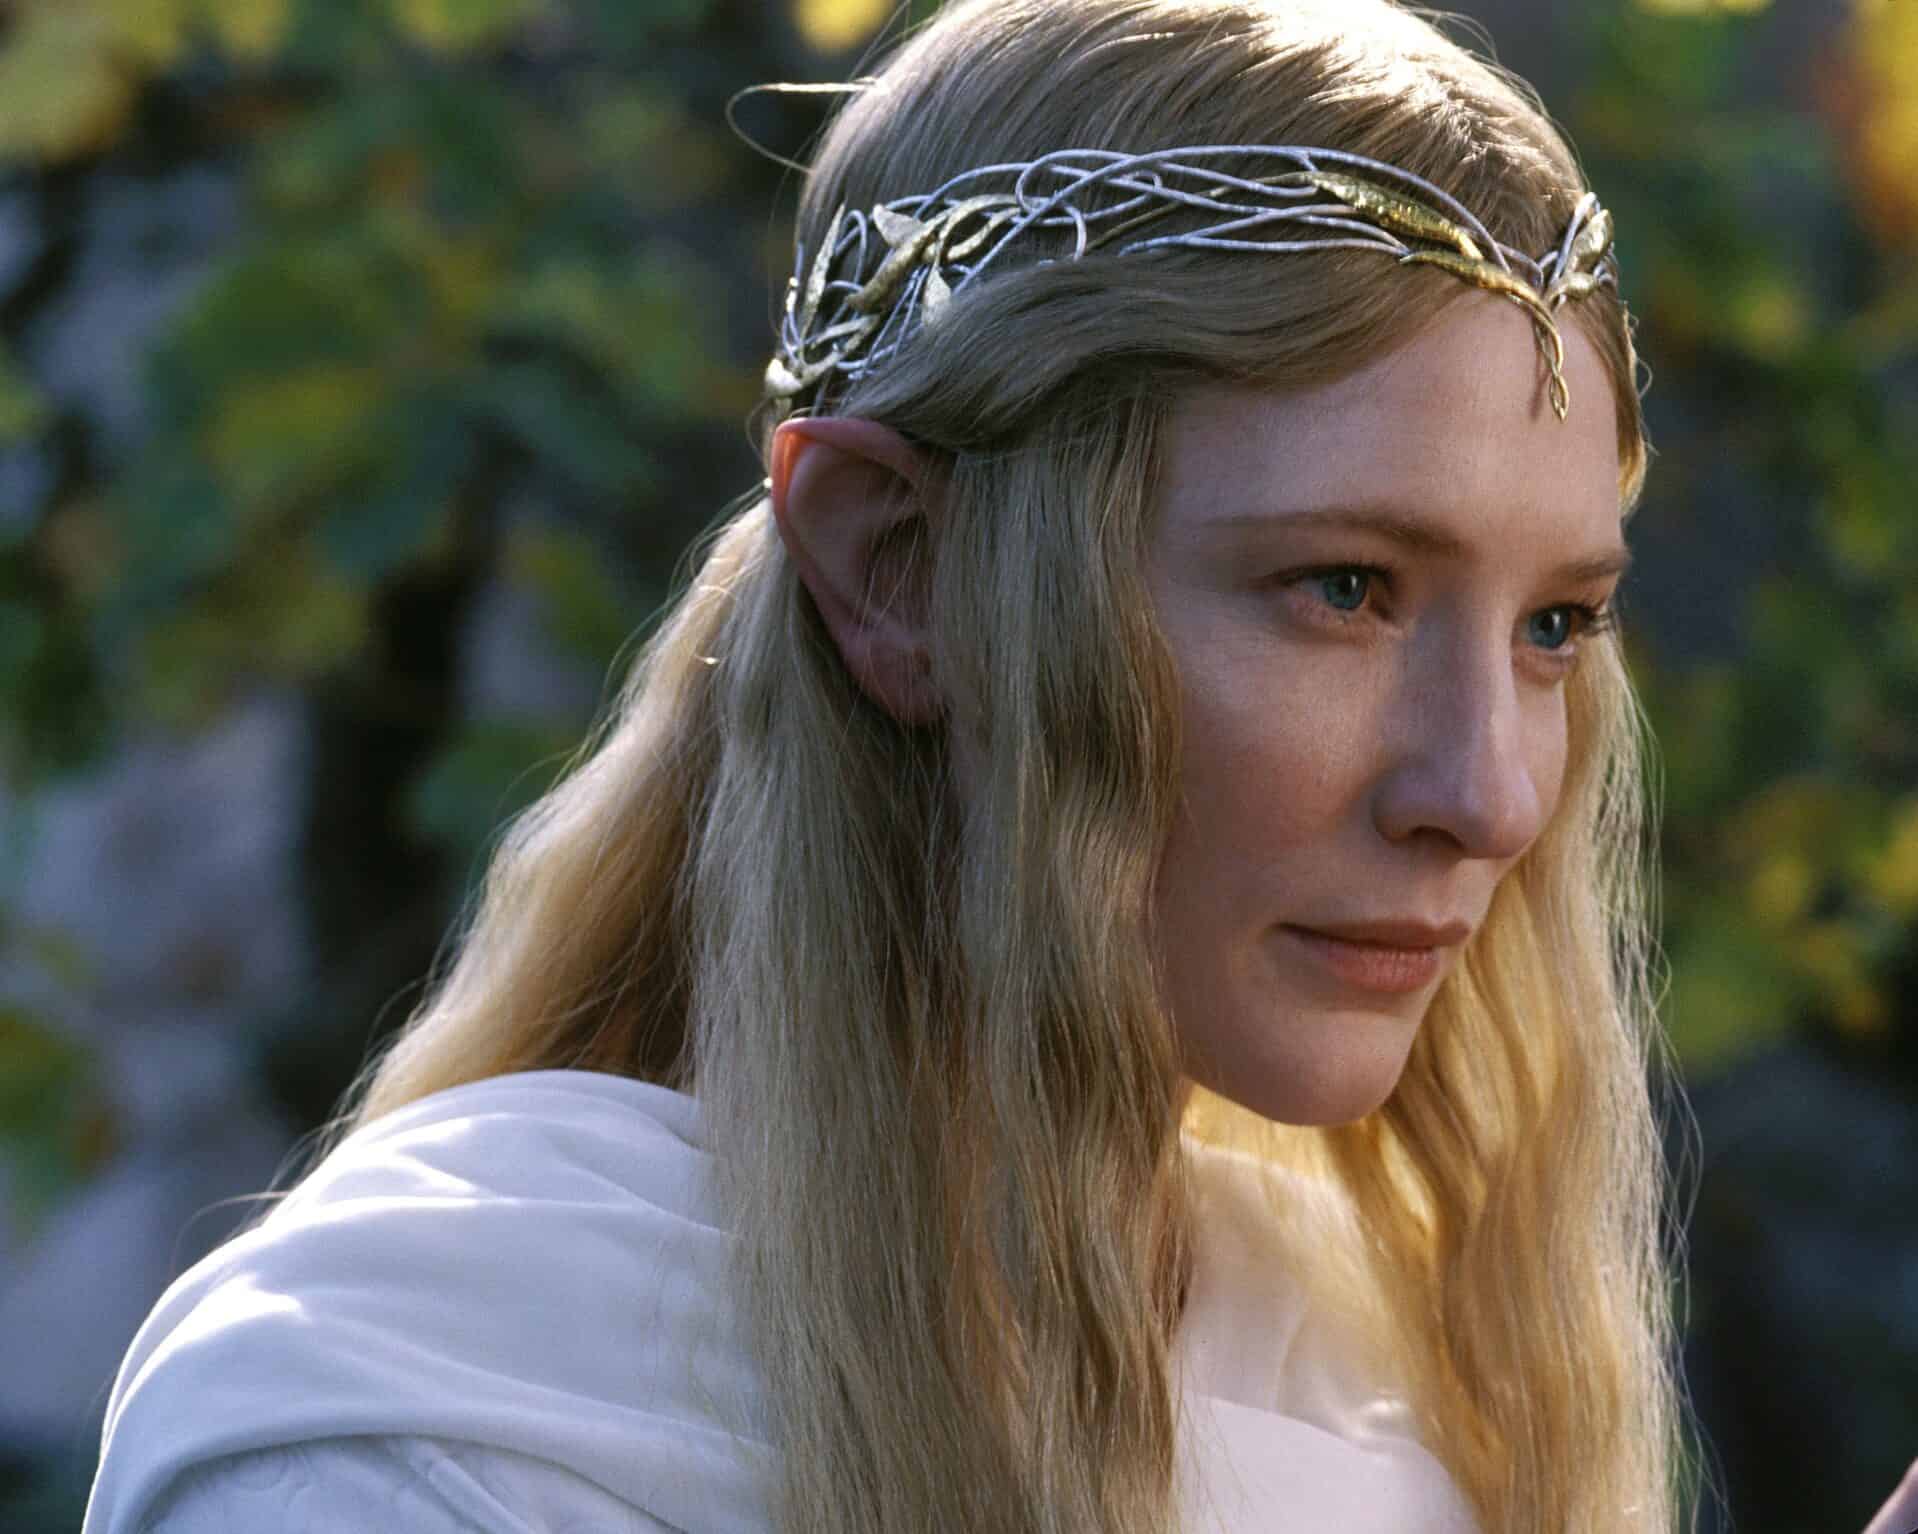 Cate Blanchett in "The Lord of the Rings"